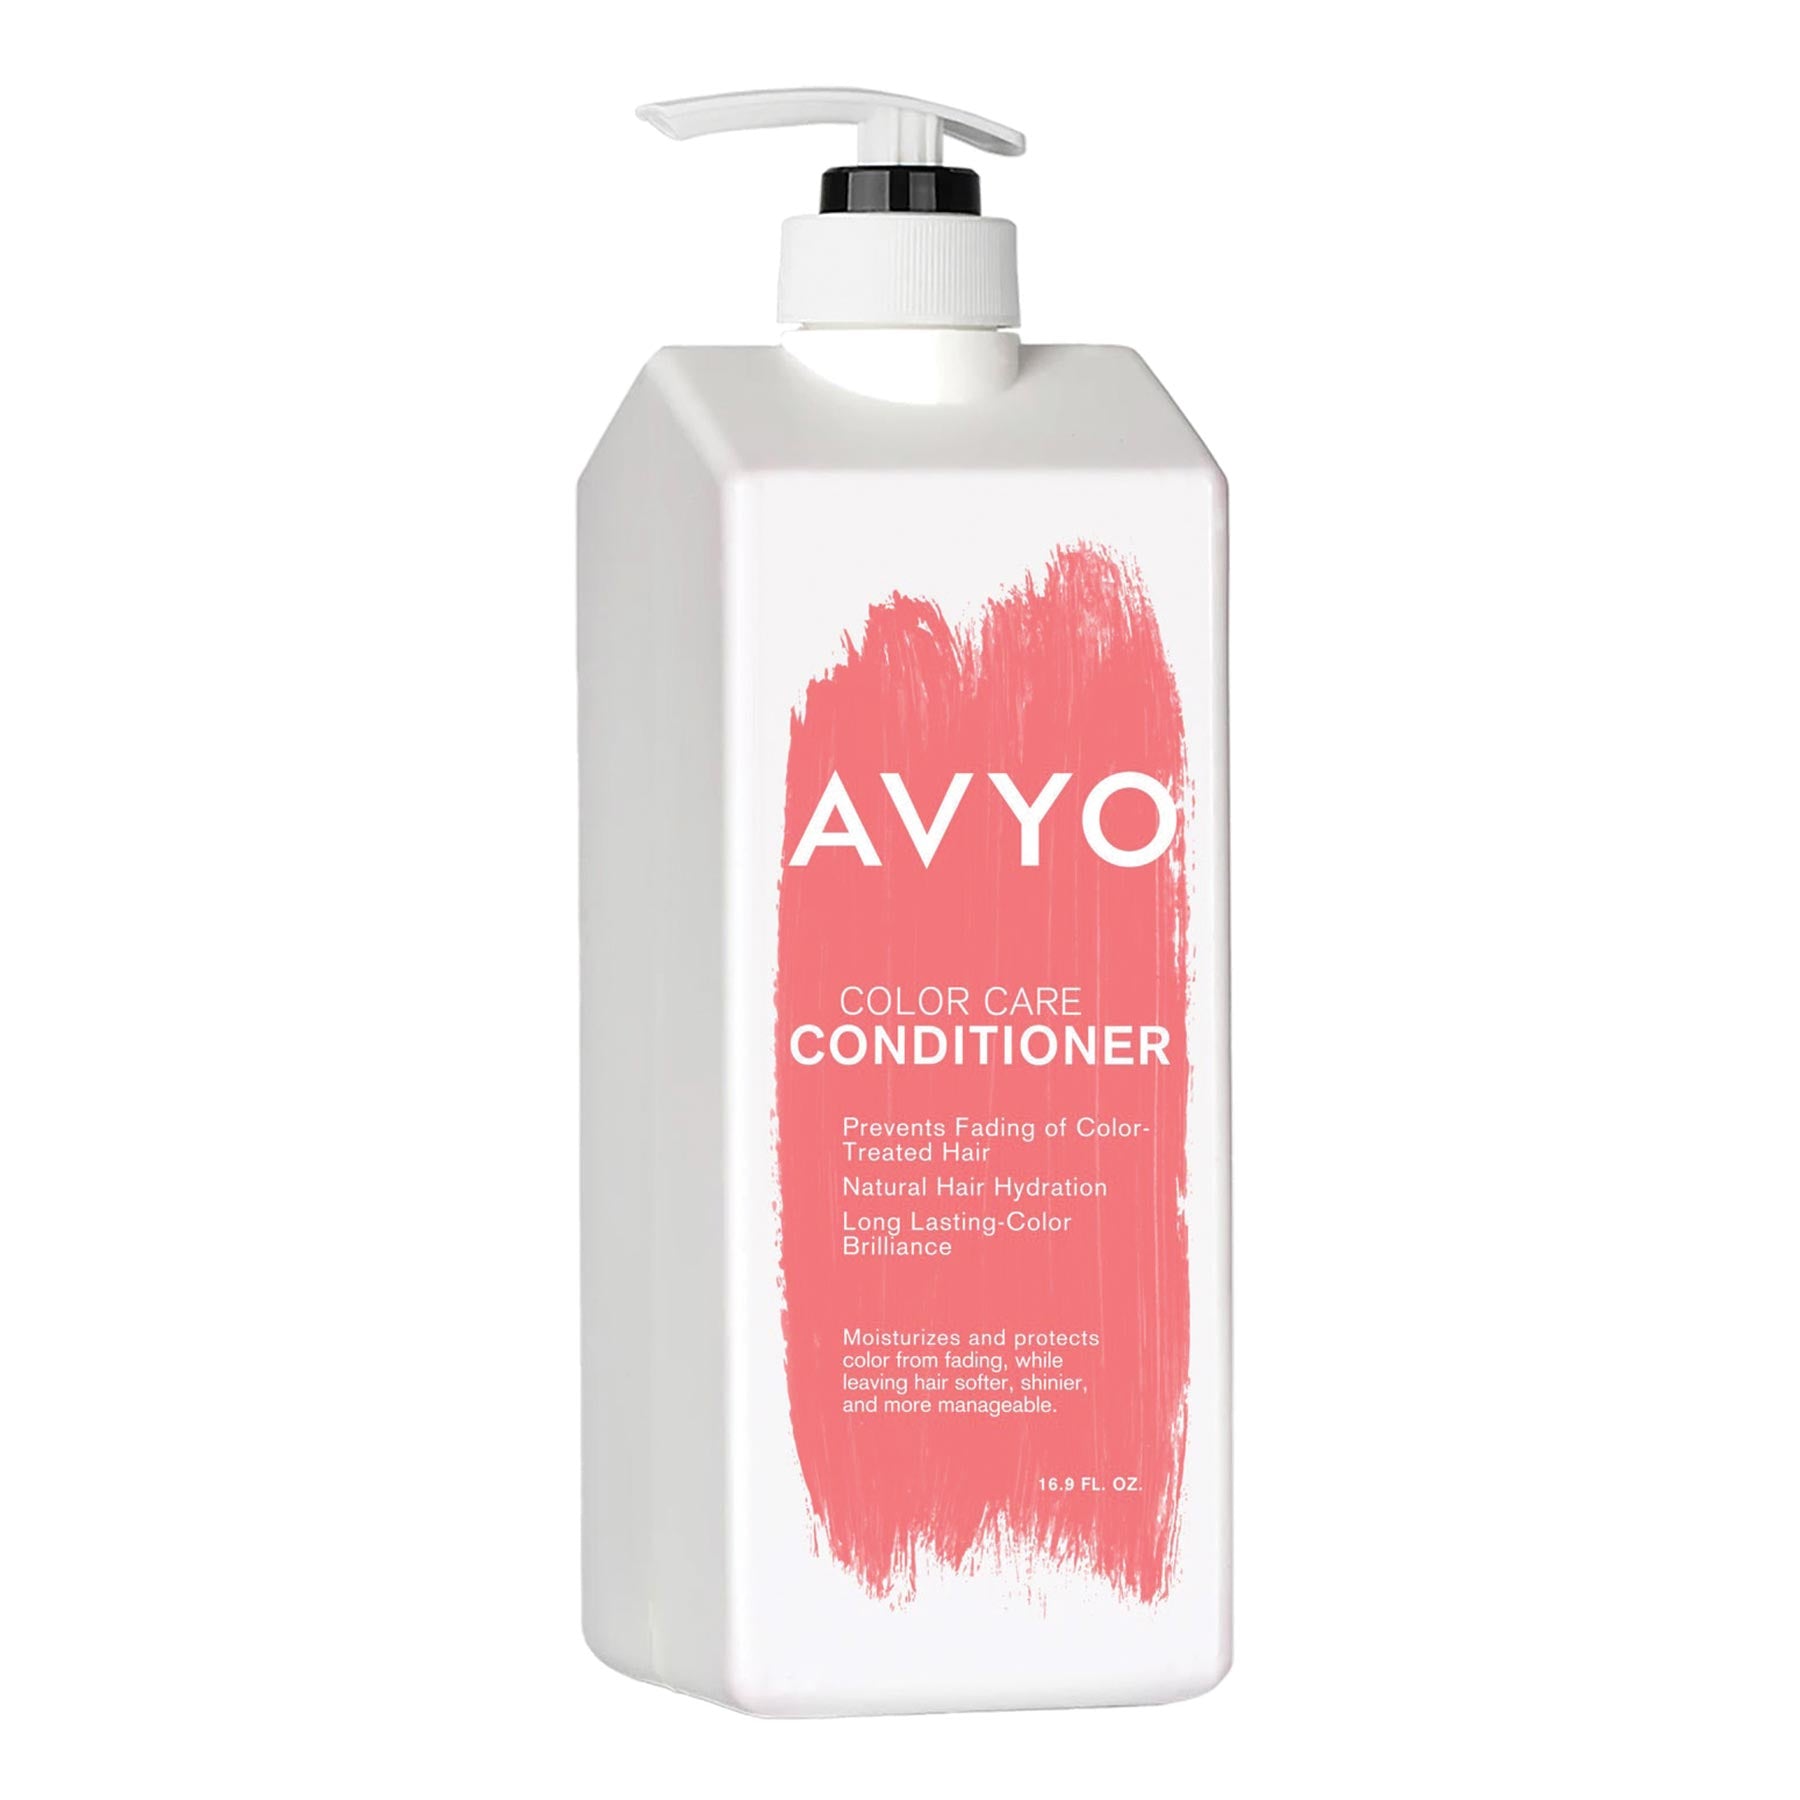 A pump bottle of AVYO Color Care Conditioner with a white background and a prominent red paint stroke on the front. The label advertises that the conditioner prevents fading of color-treated hair, provides natural hair hydration, and ensures long-lasting color brilliance. It emphasizes that the formula moisturizes and protects color from fading, leaving hair softer, shinier, and more manageable. The product contains 16.9 FL OZ of conditioner.